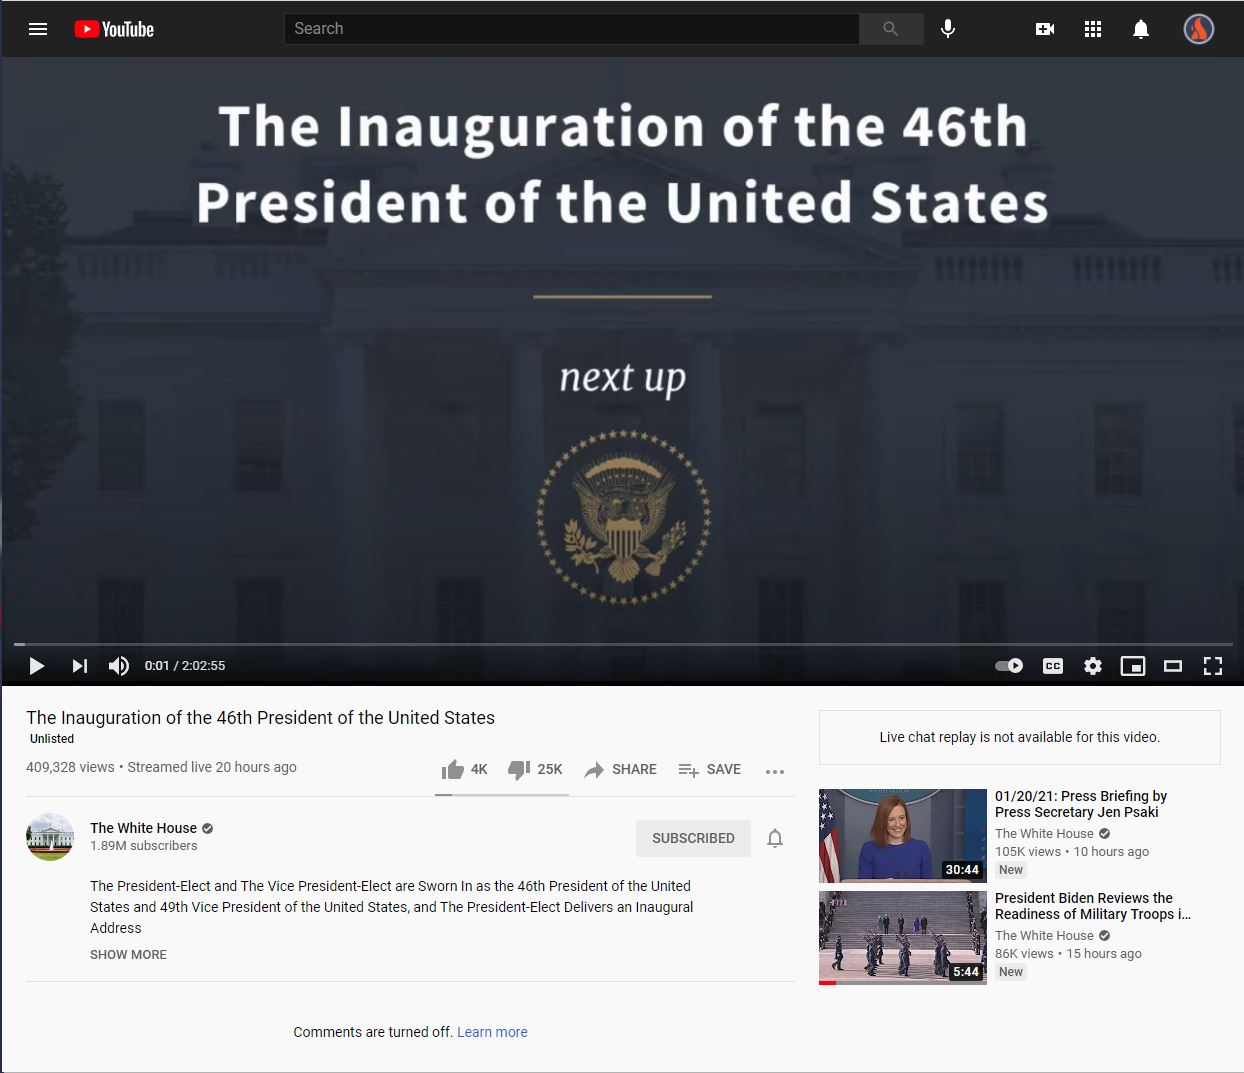 President Biden Inauguration Video Ratioed Unlisted on YouTube